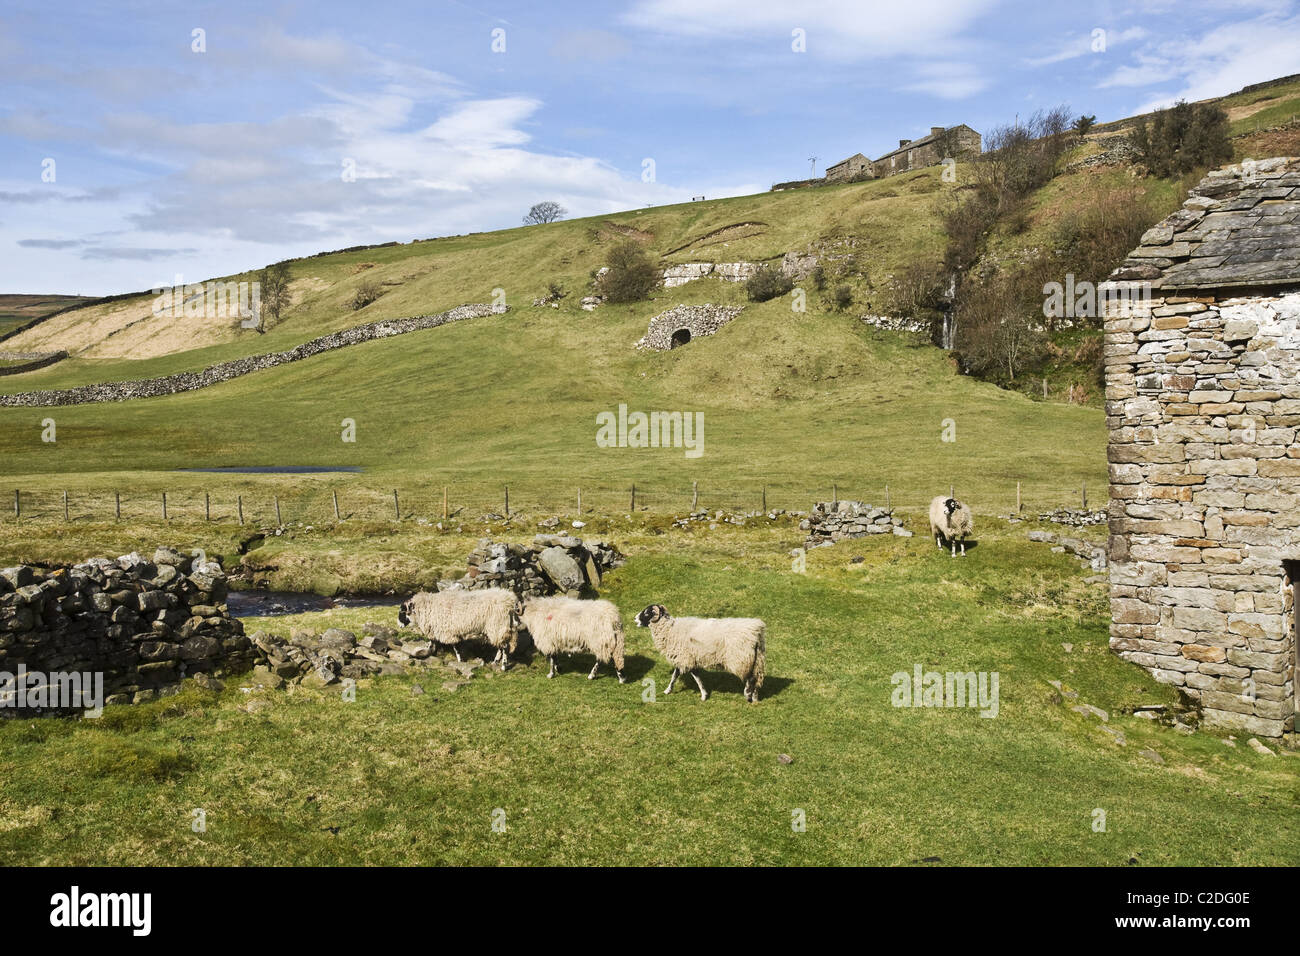 Sheep in a field in Upper Swaledale, Yorkshire Dales National Park. An old lime kiln can be seen in middle background of picture Stock Photo